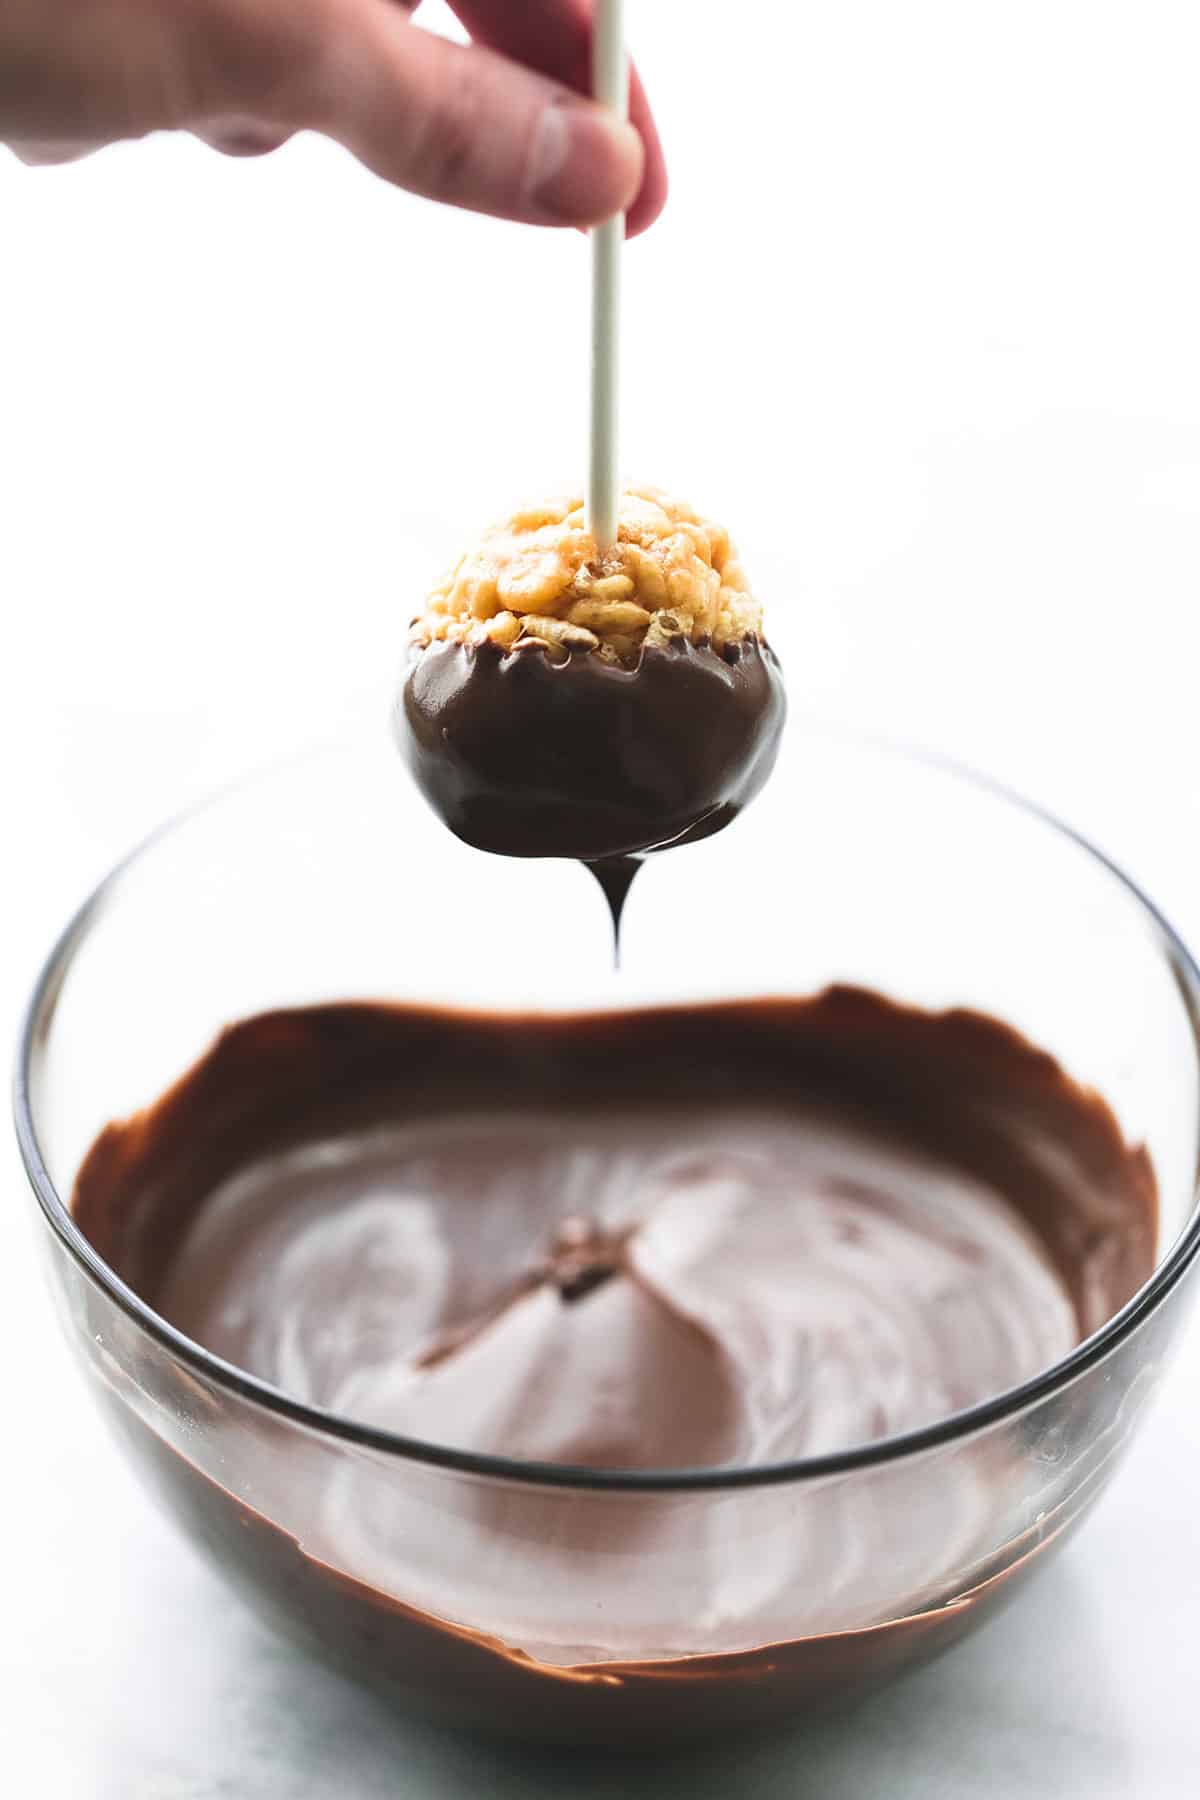 a hand holding a scotcheroo on a stick just dipped in chocolate above a bowl of chocolate.